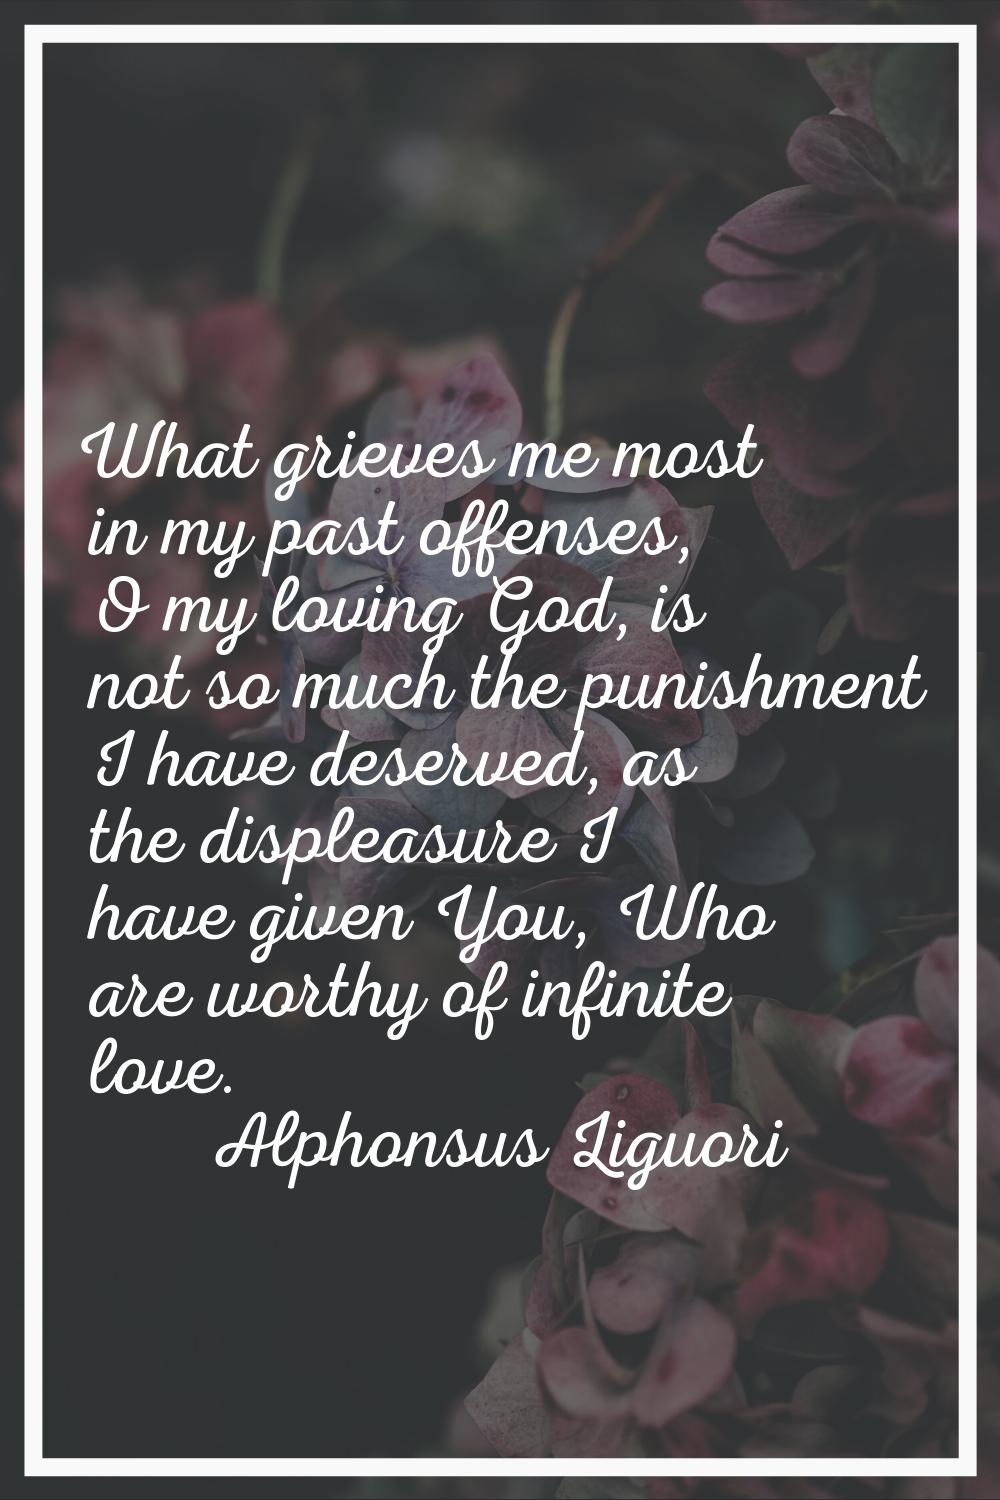 What grieves me most in my past offenses, O my loving God, is not so much the punishment I have des